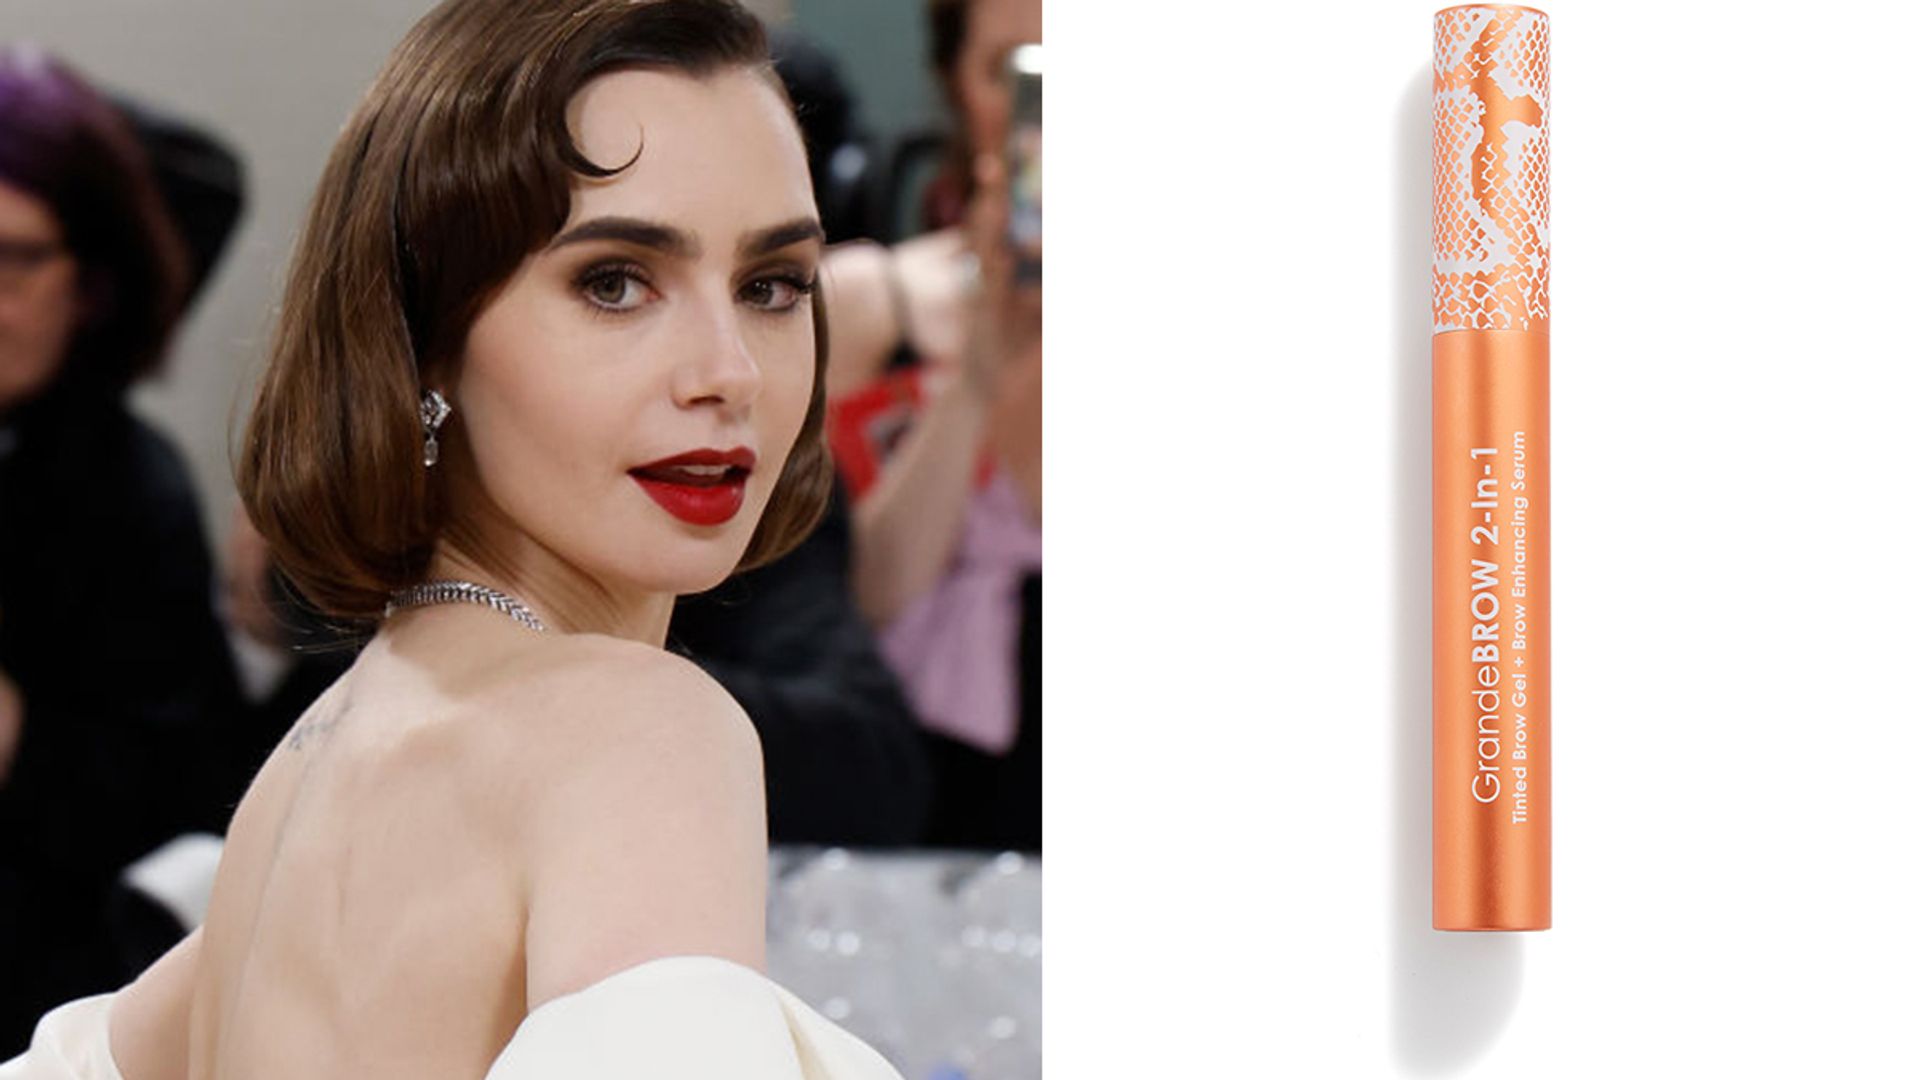 Lily Collins Grande Cosmetics 2-in-1 Brow Serum